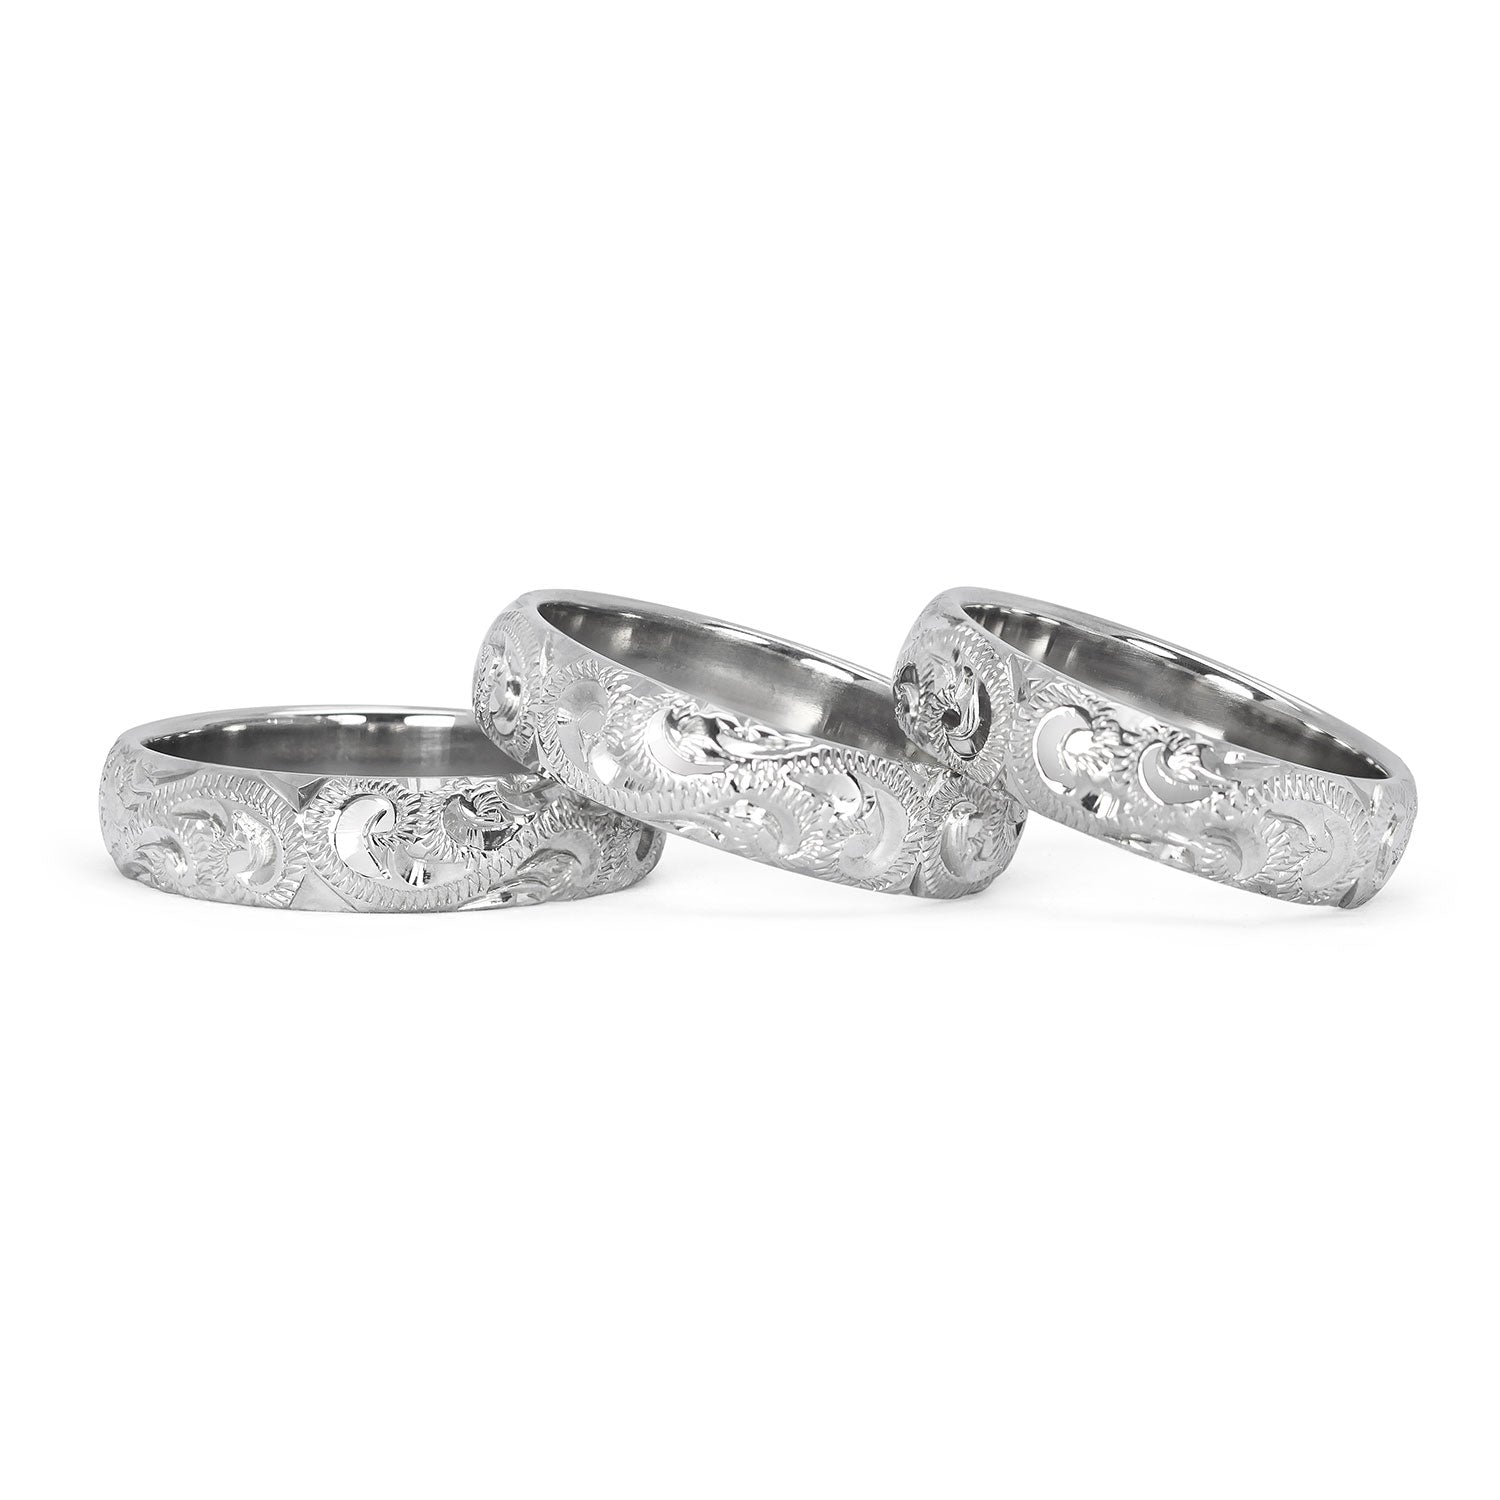 A trio of hand-engraved friendship rings, cast in 9ct recycled white gold, remodelled from our clients' late mother's ring 2